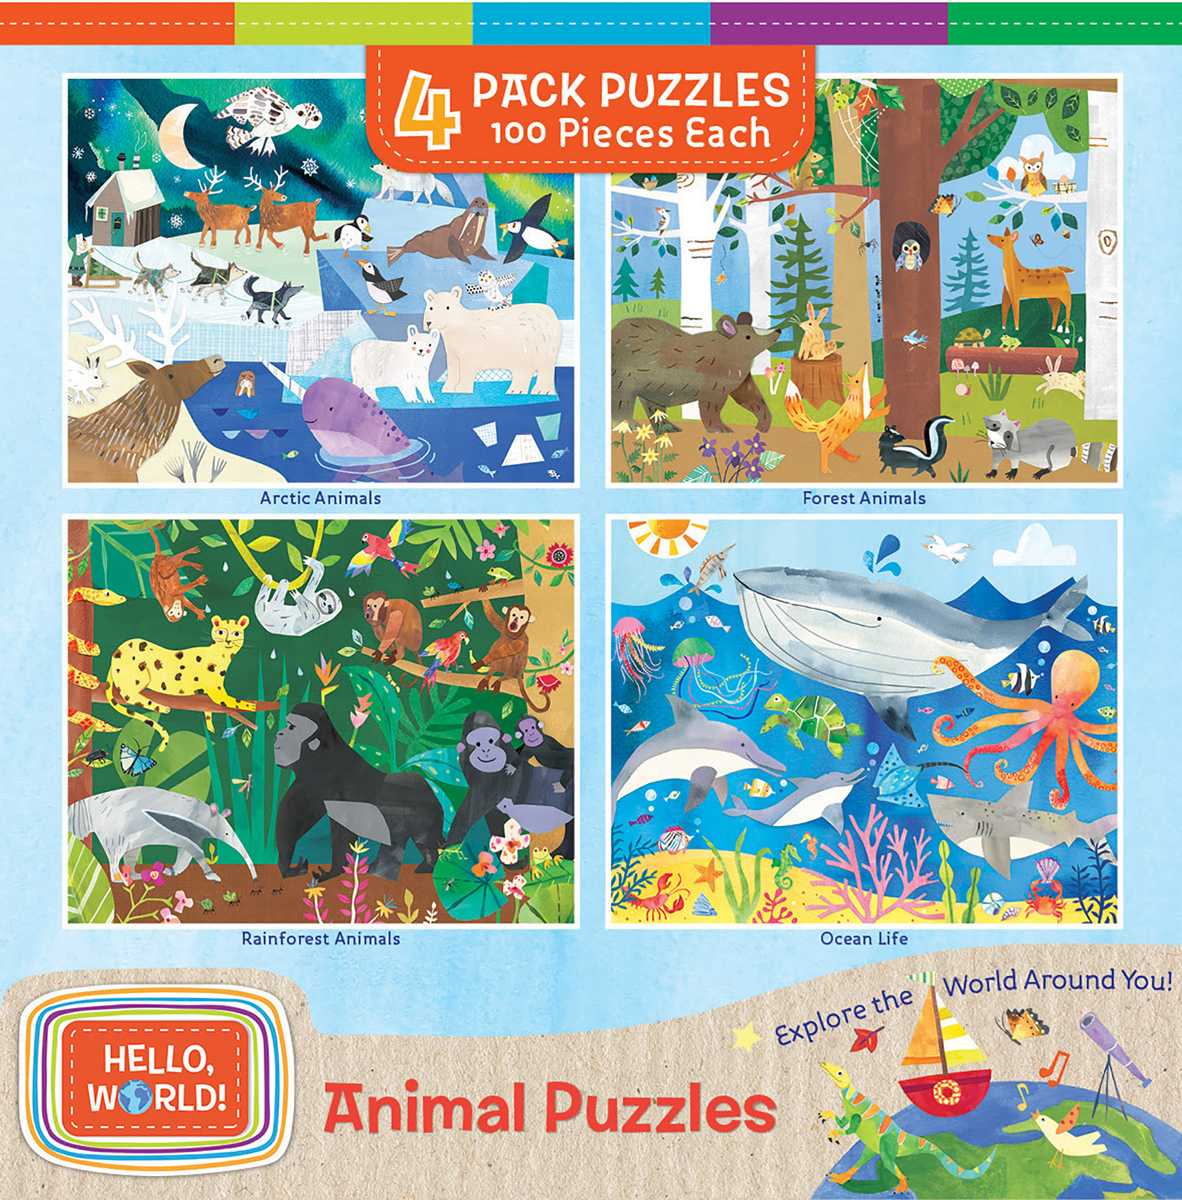 Hello, World! - 4-pack Puzzles